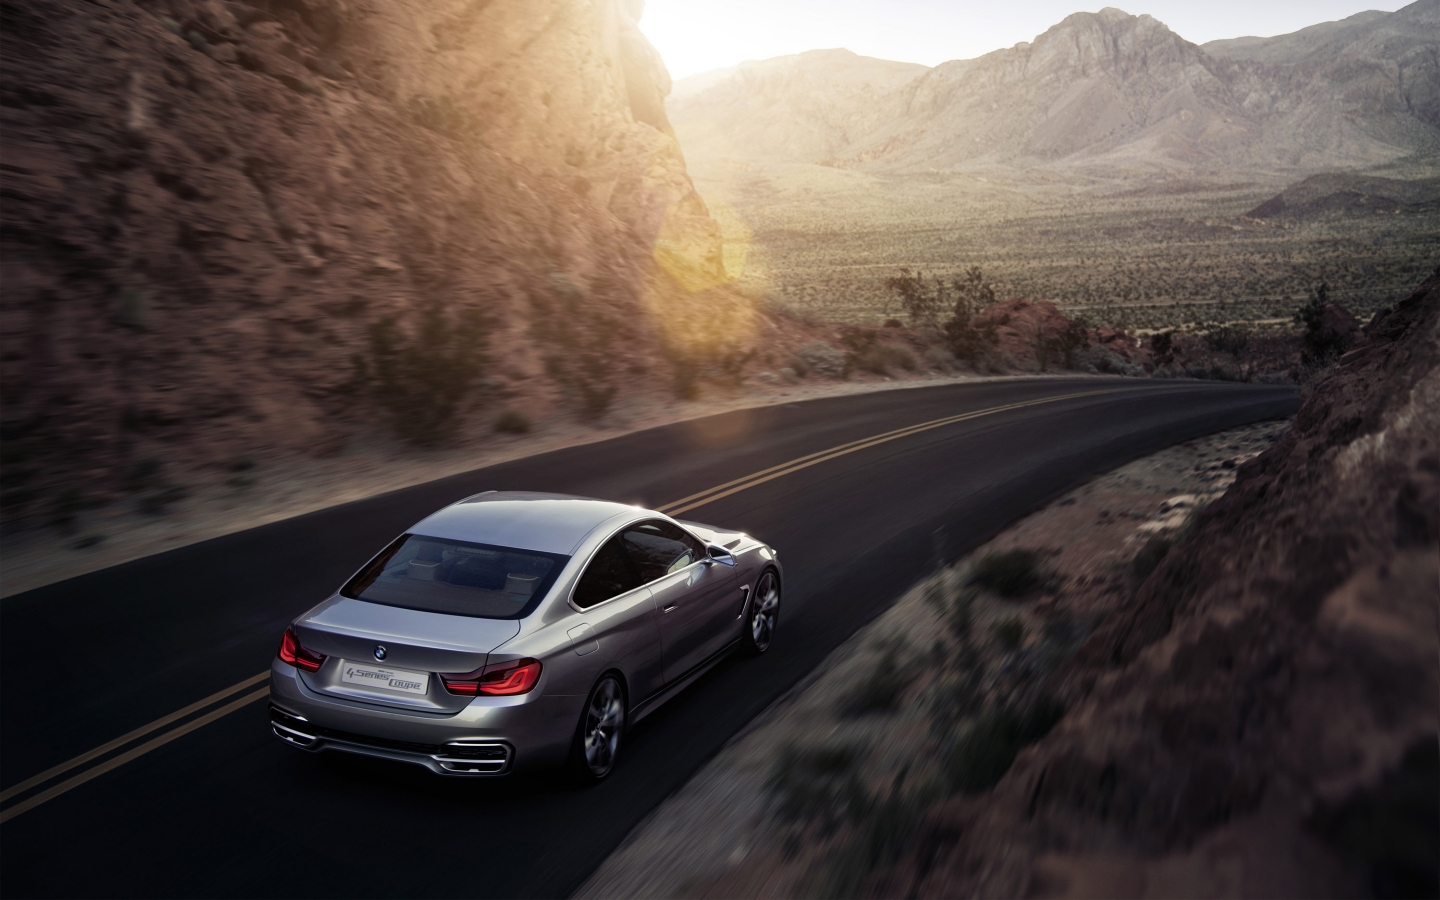 BMW 4 Series and Sunset for 1440 x 900 widescreen resolution